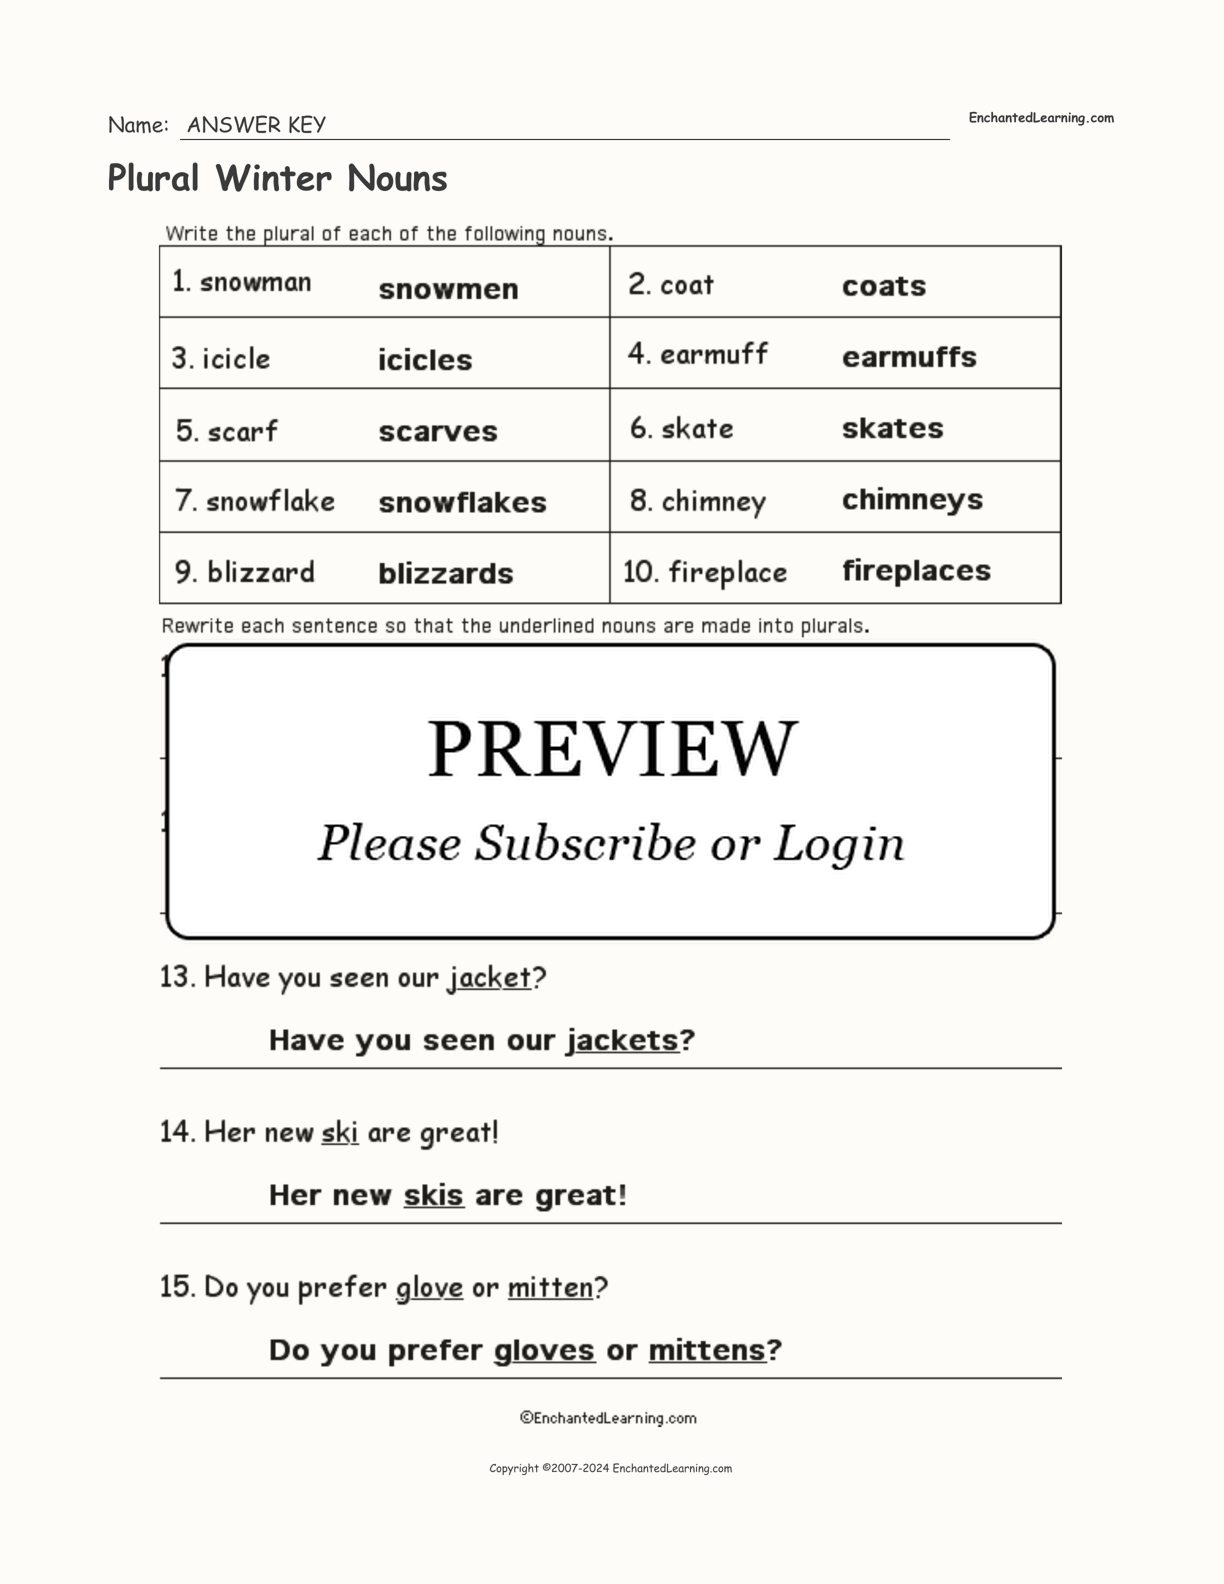 Plural Winter Nouns interactive worksheet page 2